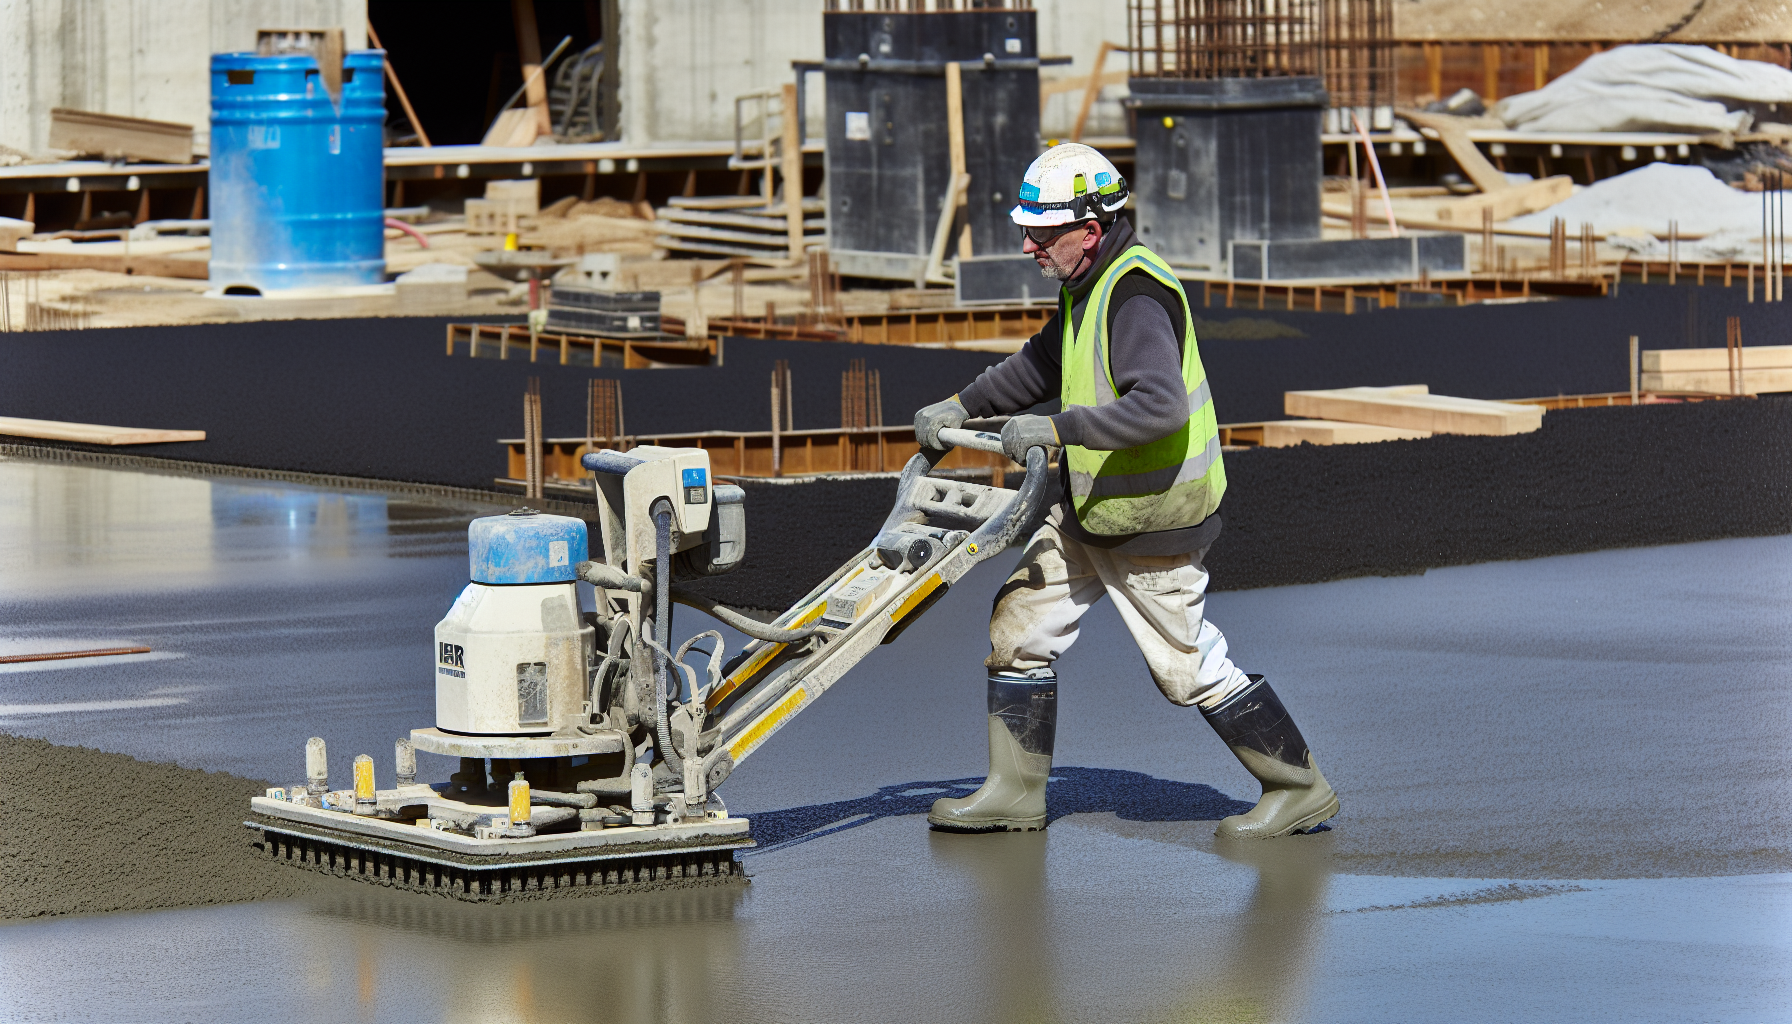 Power screed being used on a large concrete slab